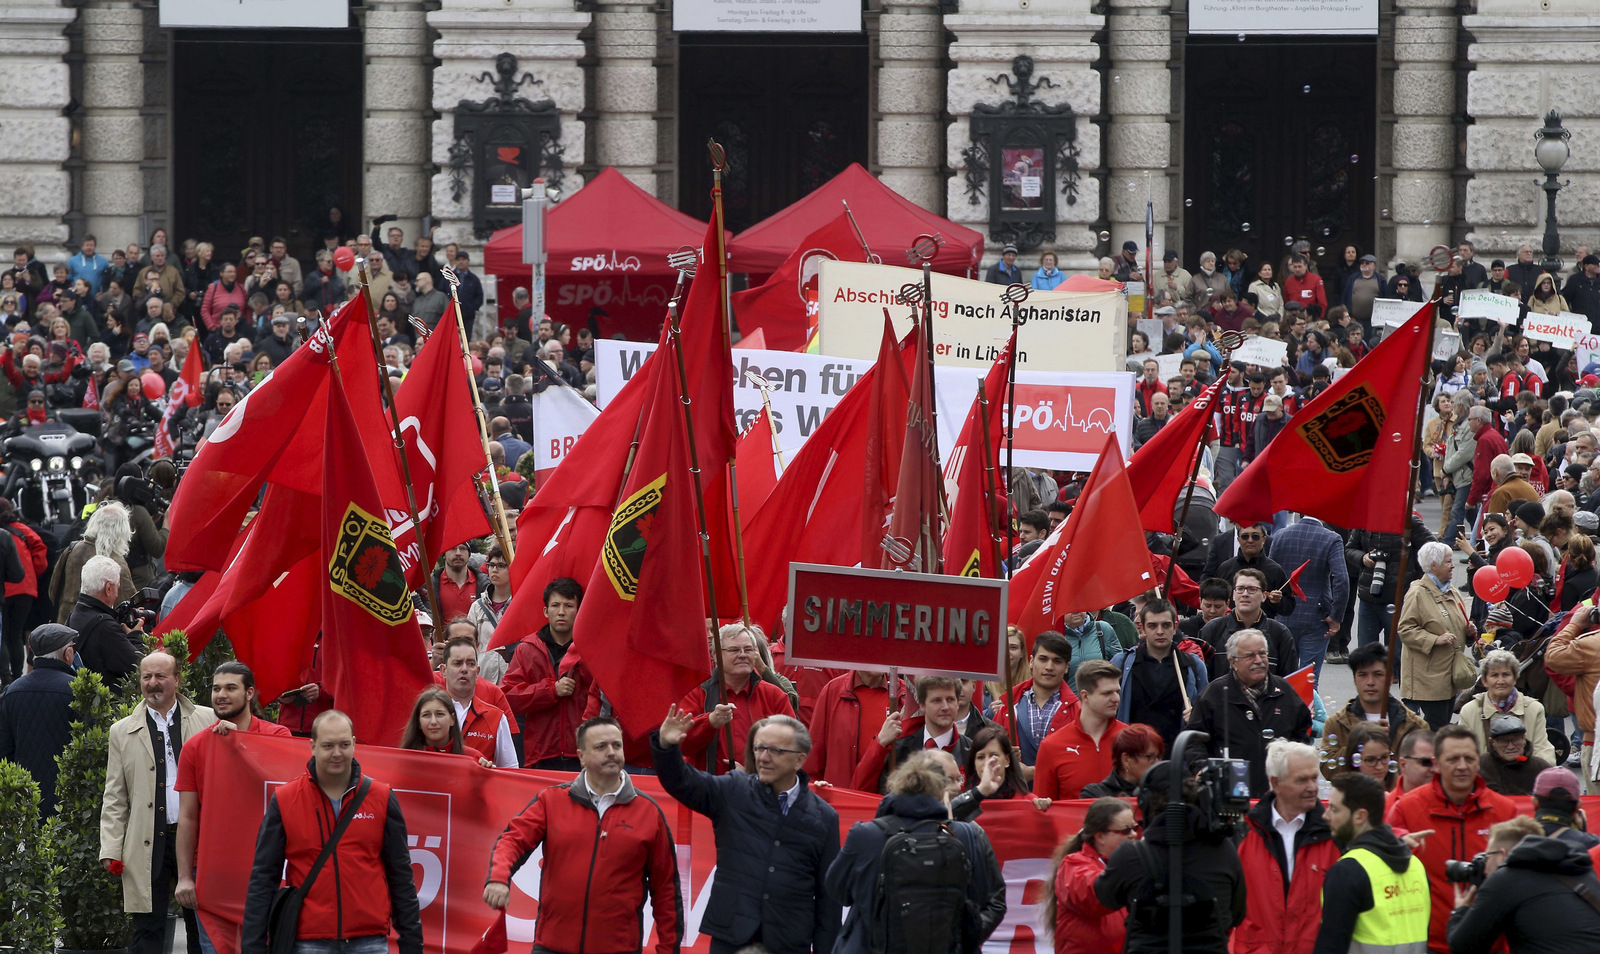 Participants of the traditional May Day celebrations, organized by the Austrian Social Democrats, SPOE, and trade unions walk with flags and banners in Vienna, Austria, Monday, May 1, 2017. 